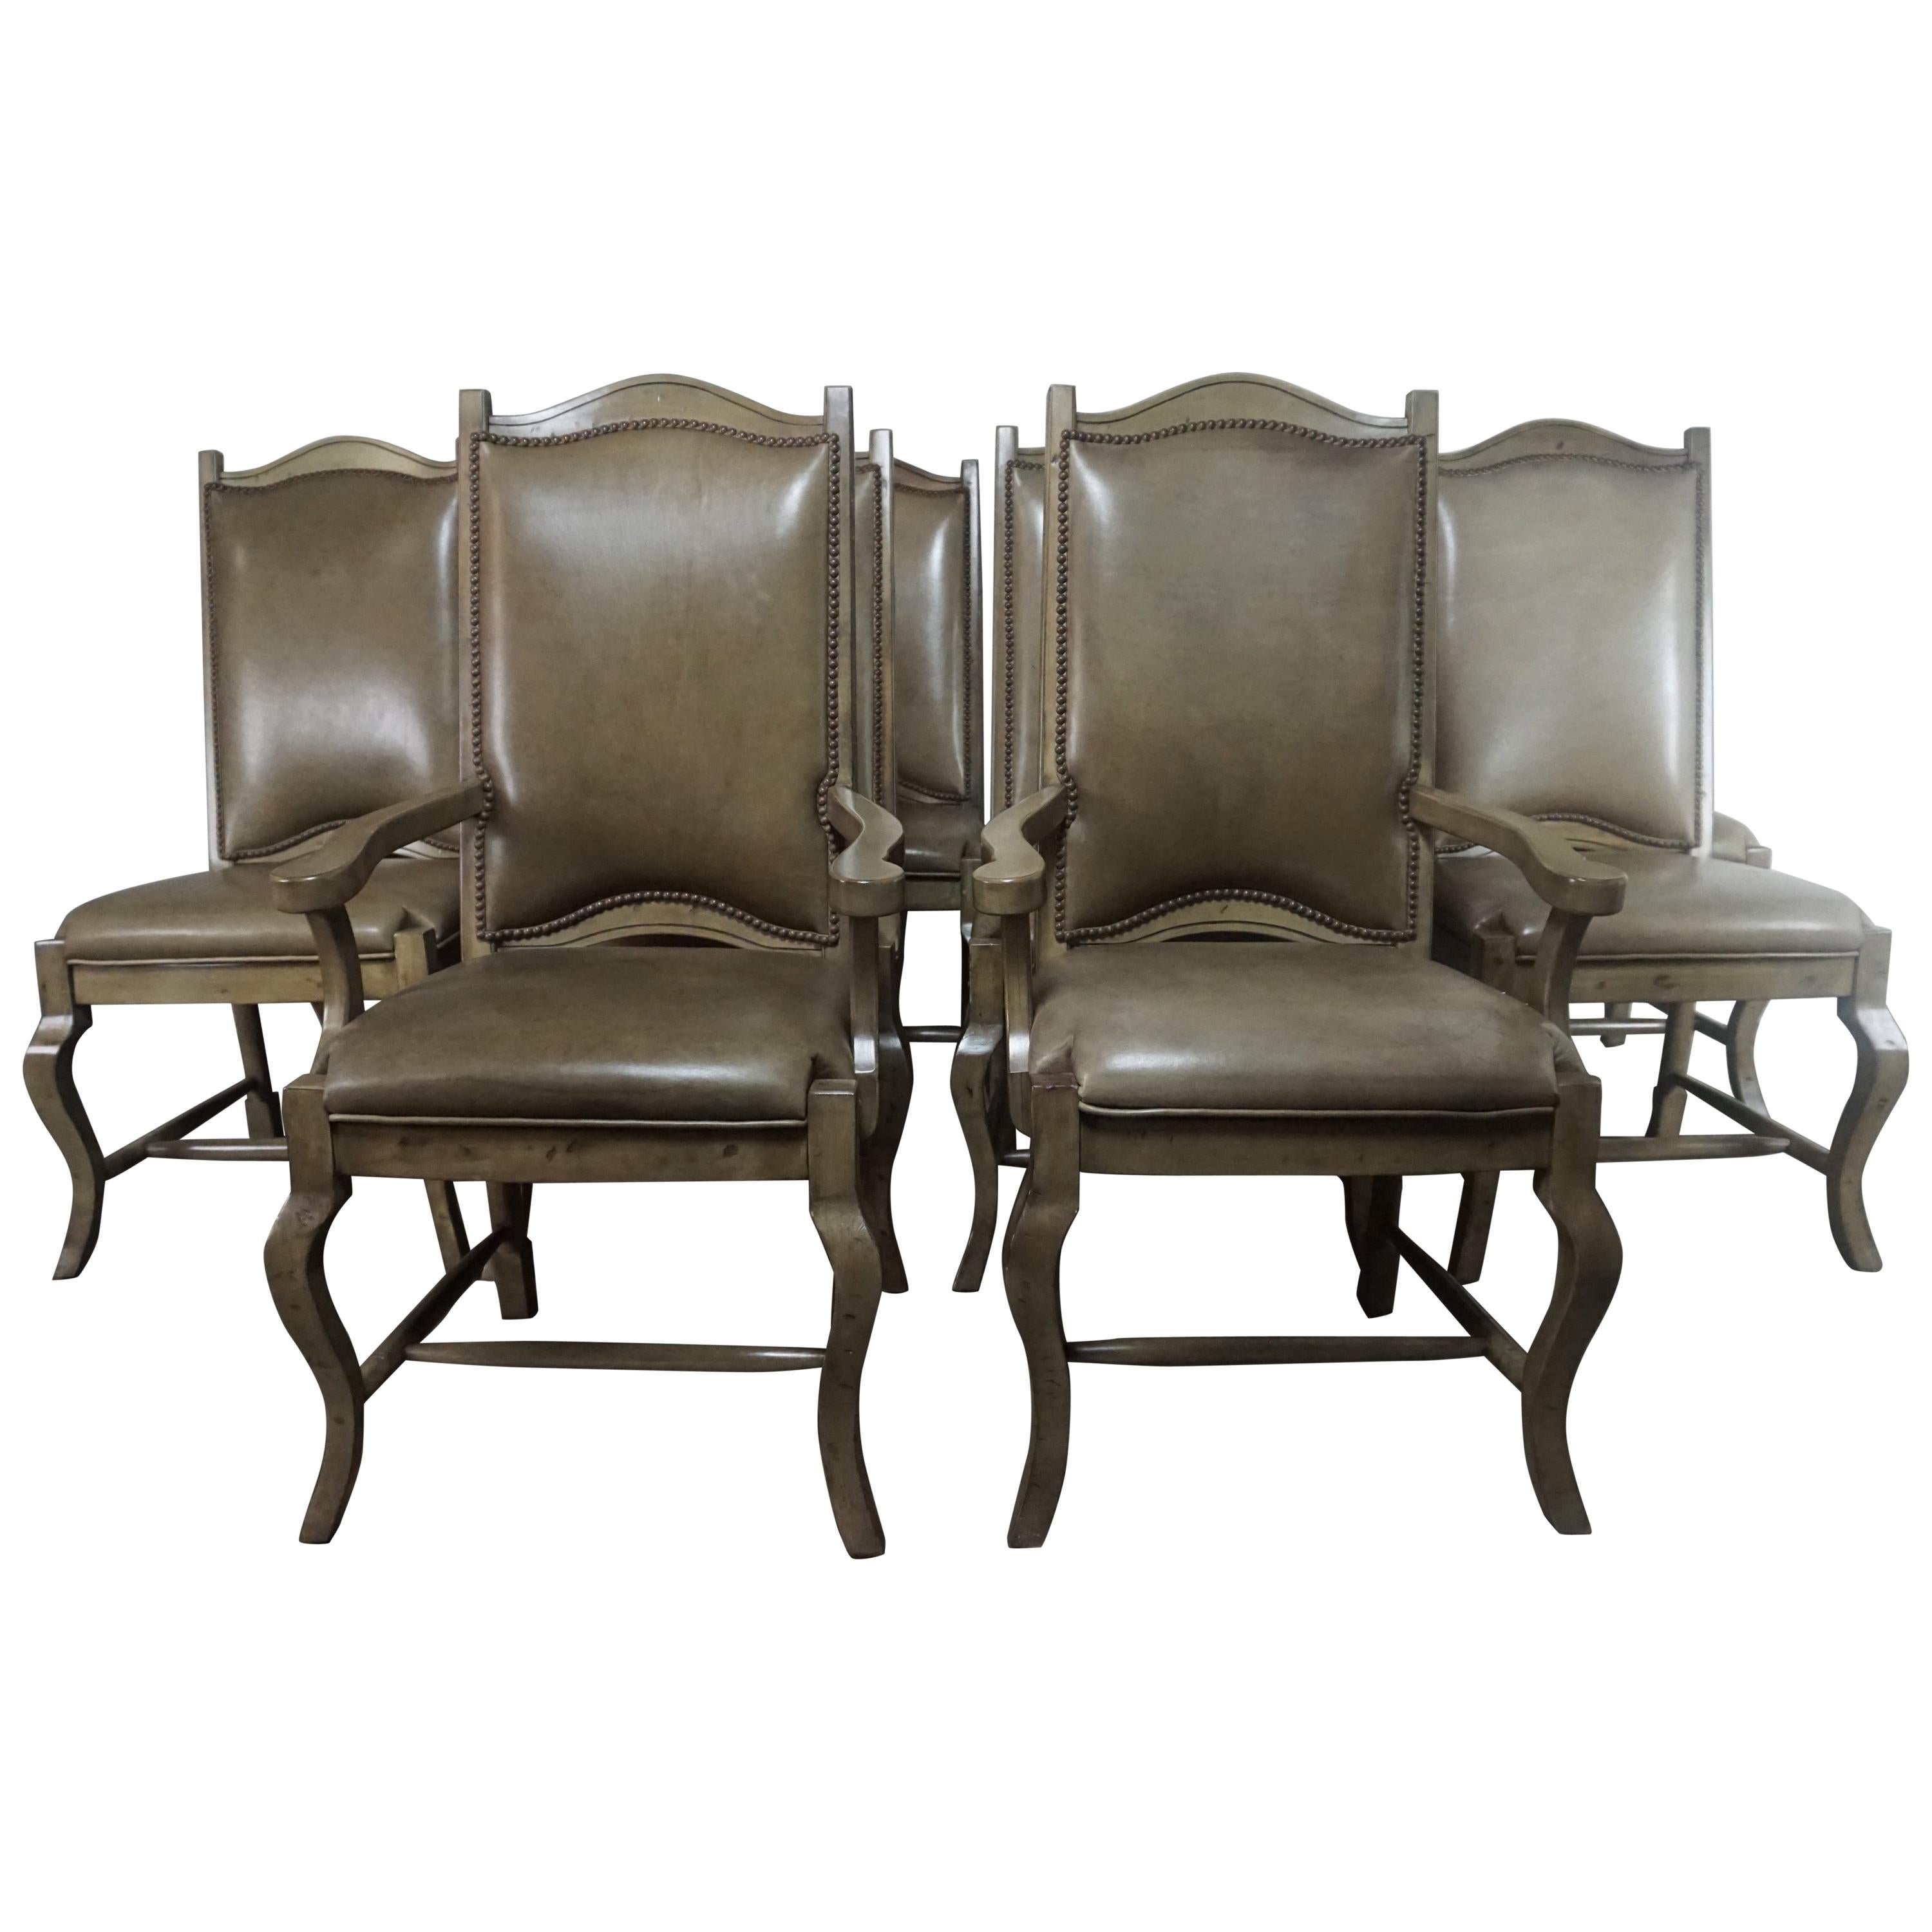 Set of 10 Leather Upholstered French Dining Chairs